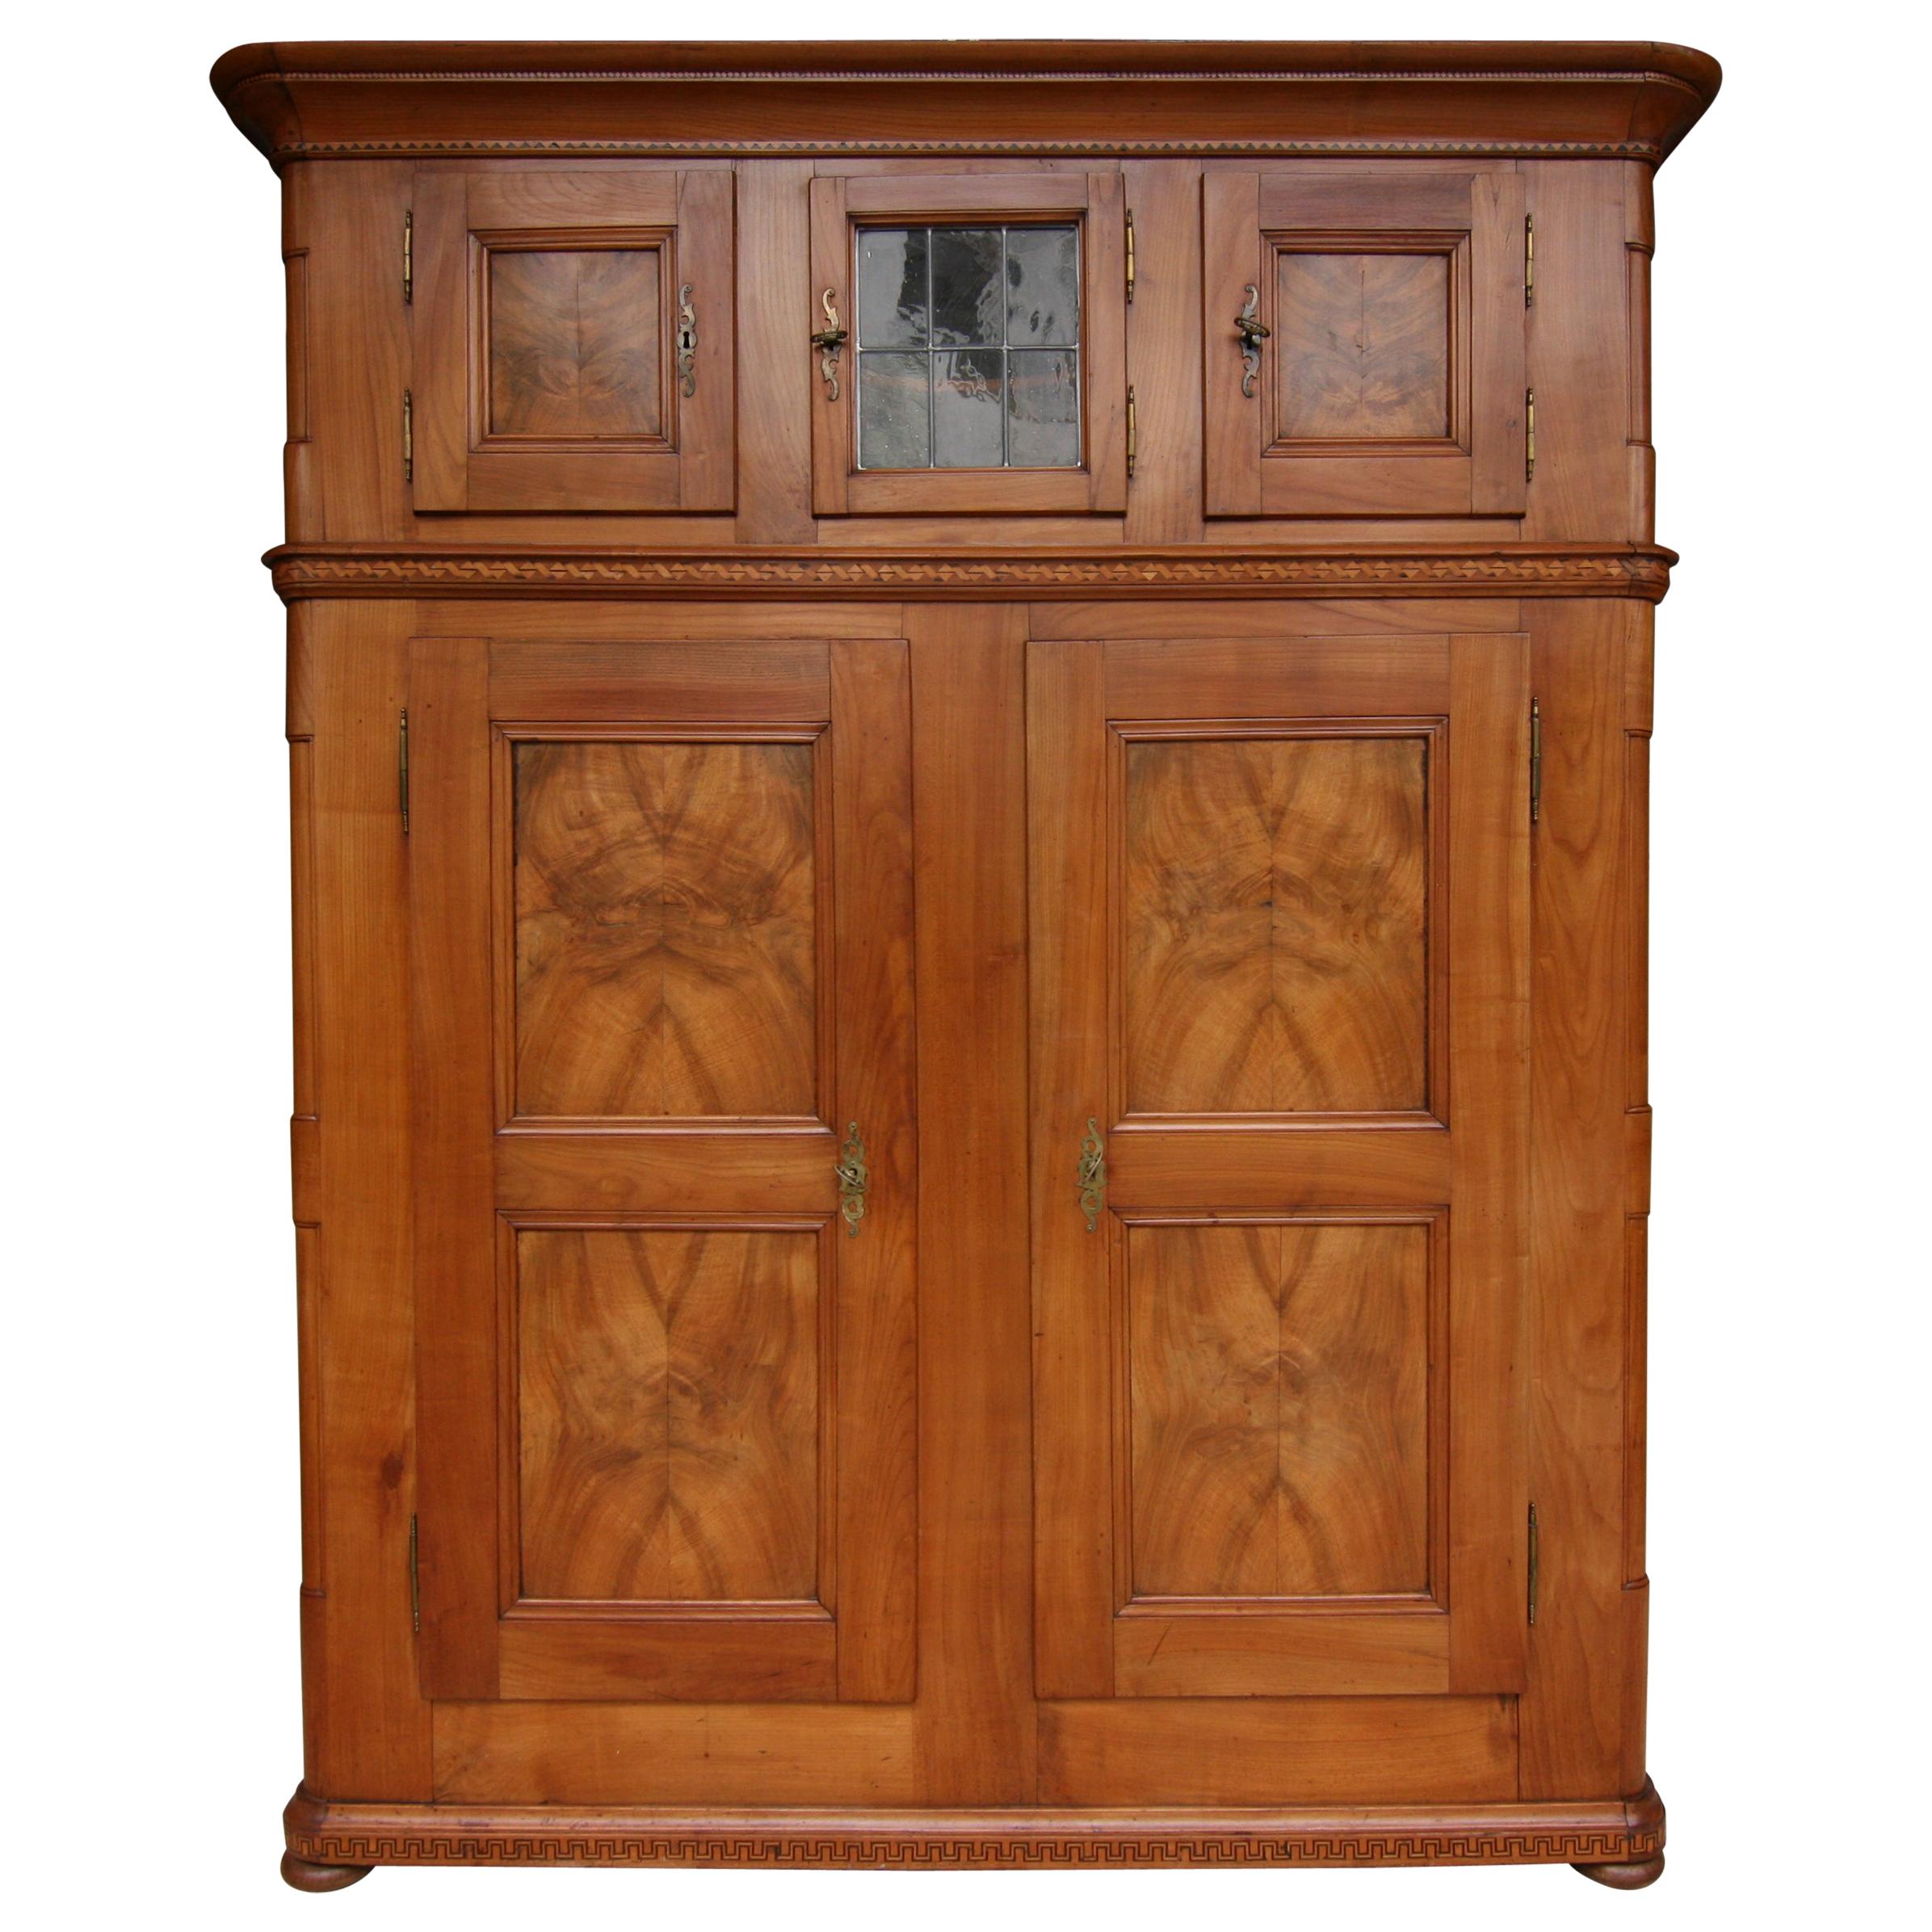 Early 19th Century Swiss Cupboard made of Cherry Wood with Marquetry